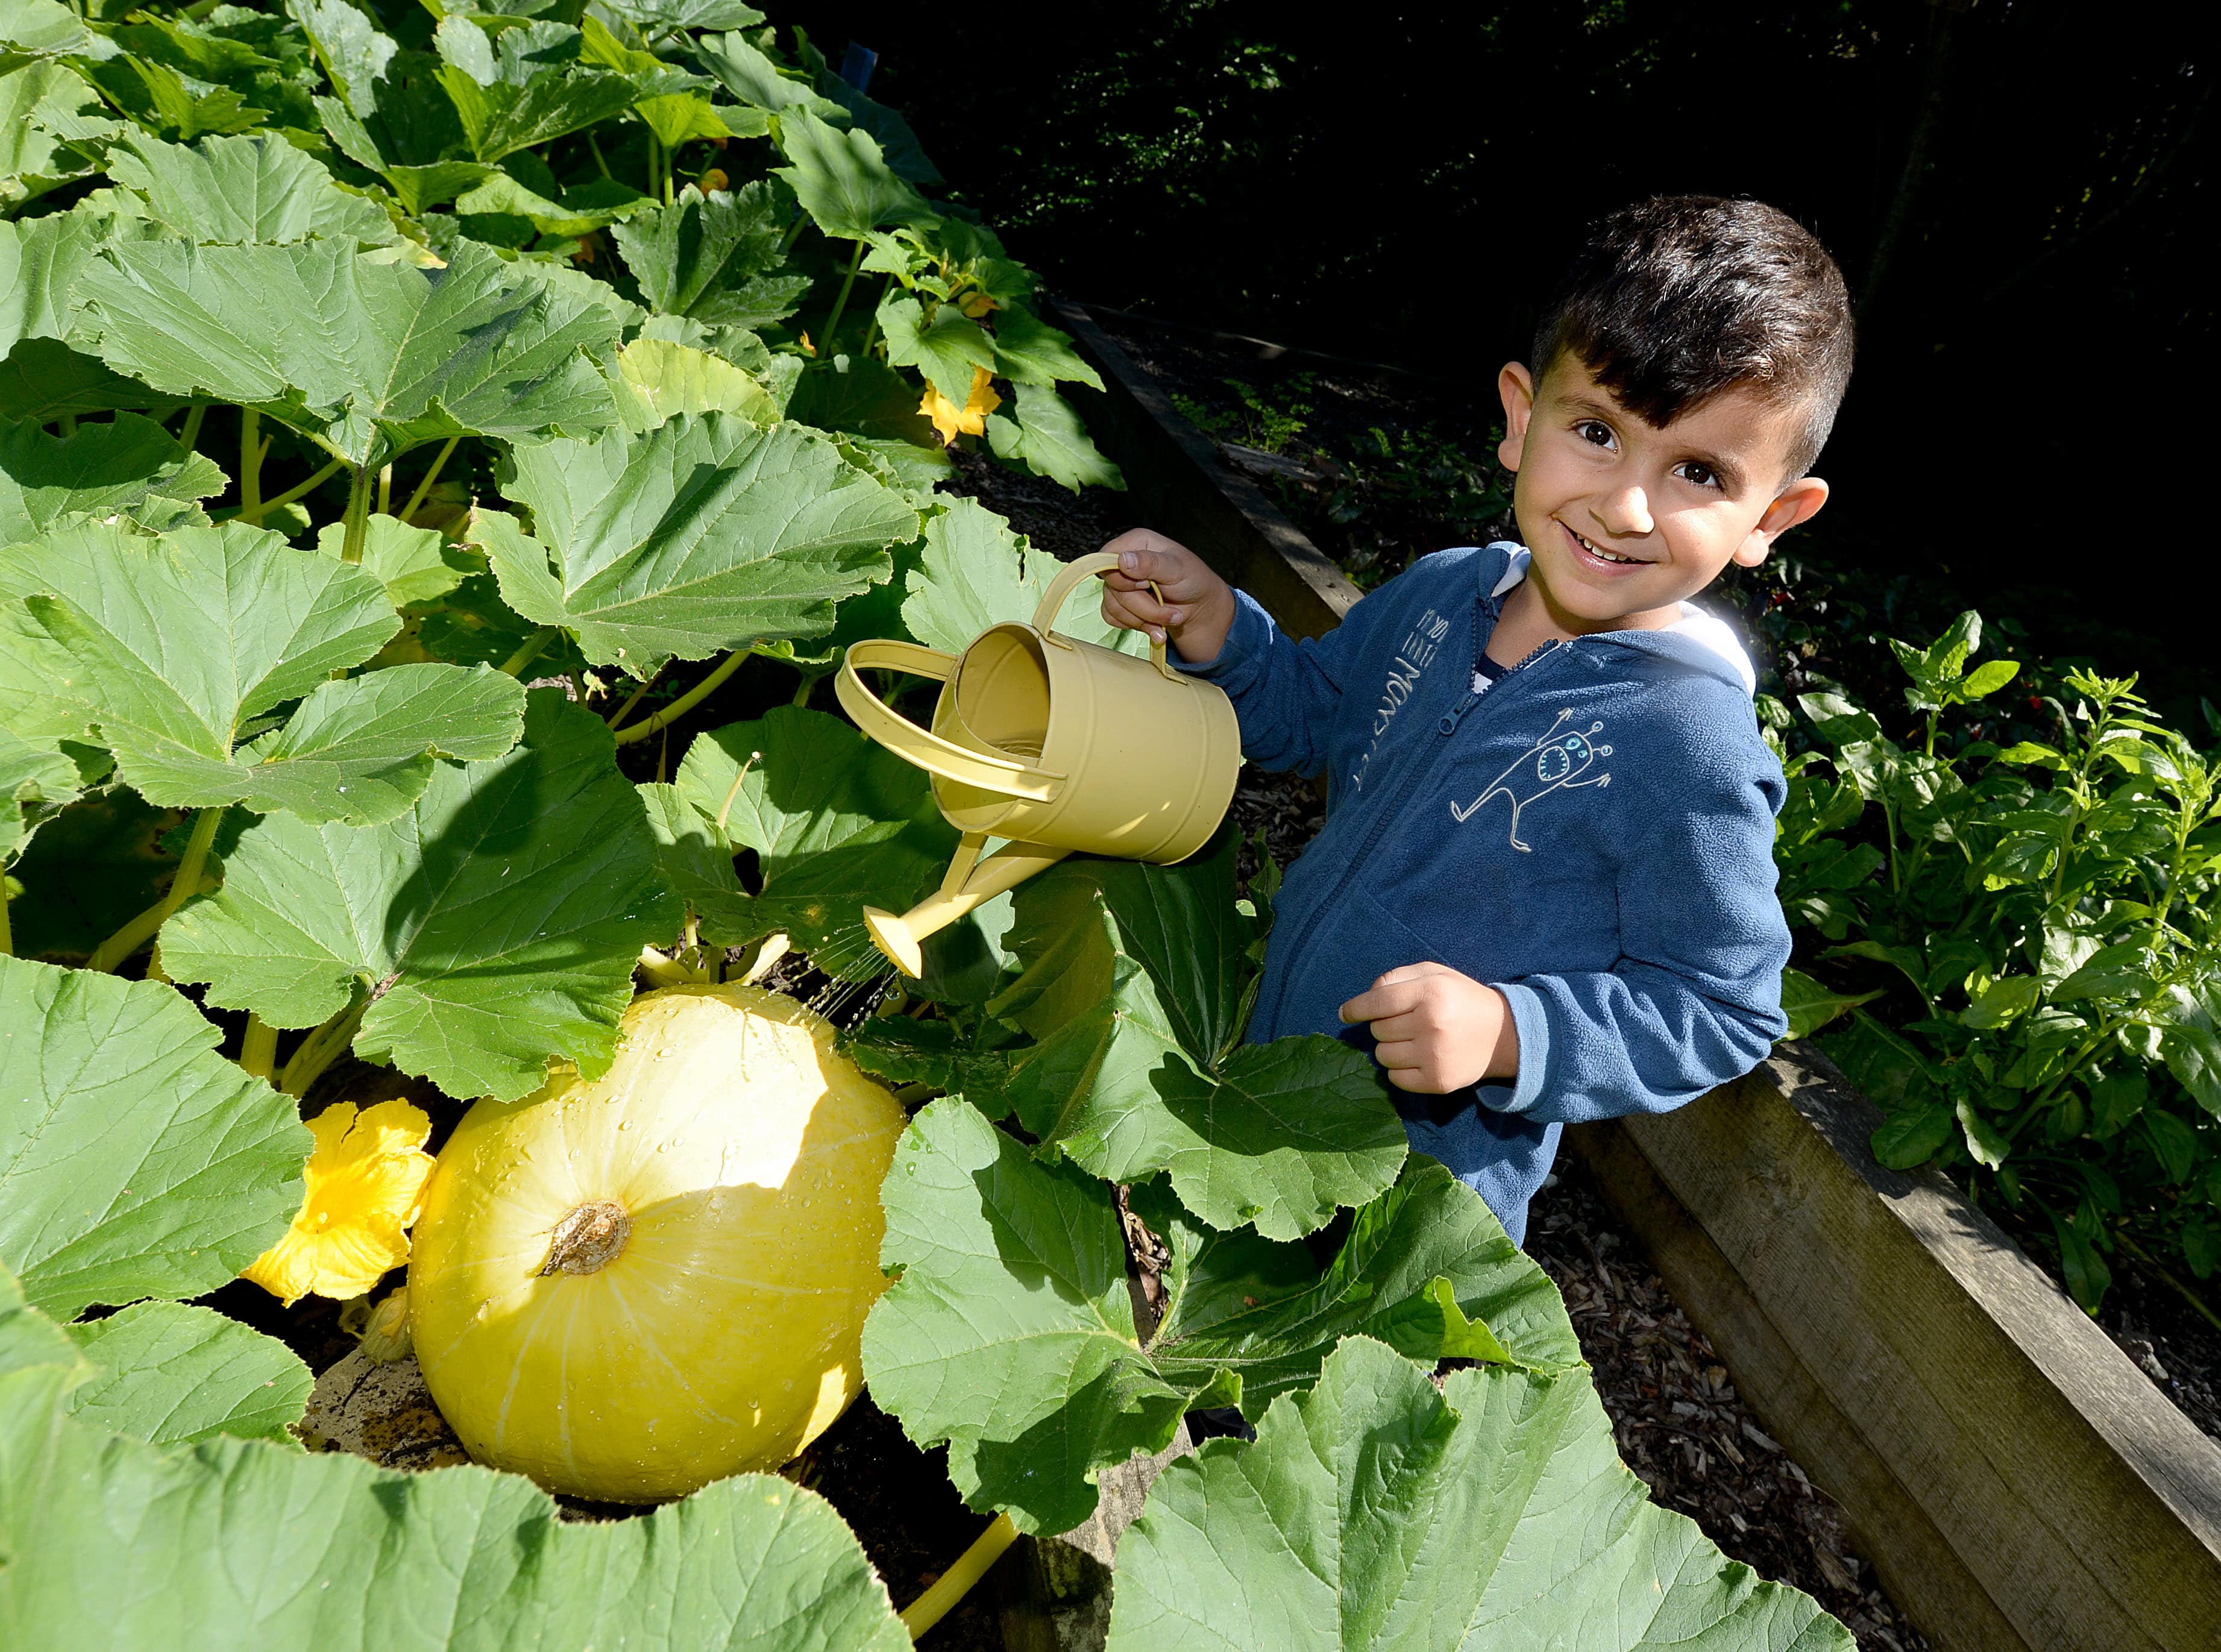 Ravyar Osman, aged 4, watering the pumpkins at the Tinsley Community Allotment in Sheffield, South Yorkshire, which has won a 'Cultivation Street' award - a competition run by celebrity gardener, David Domoney.